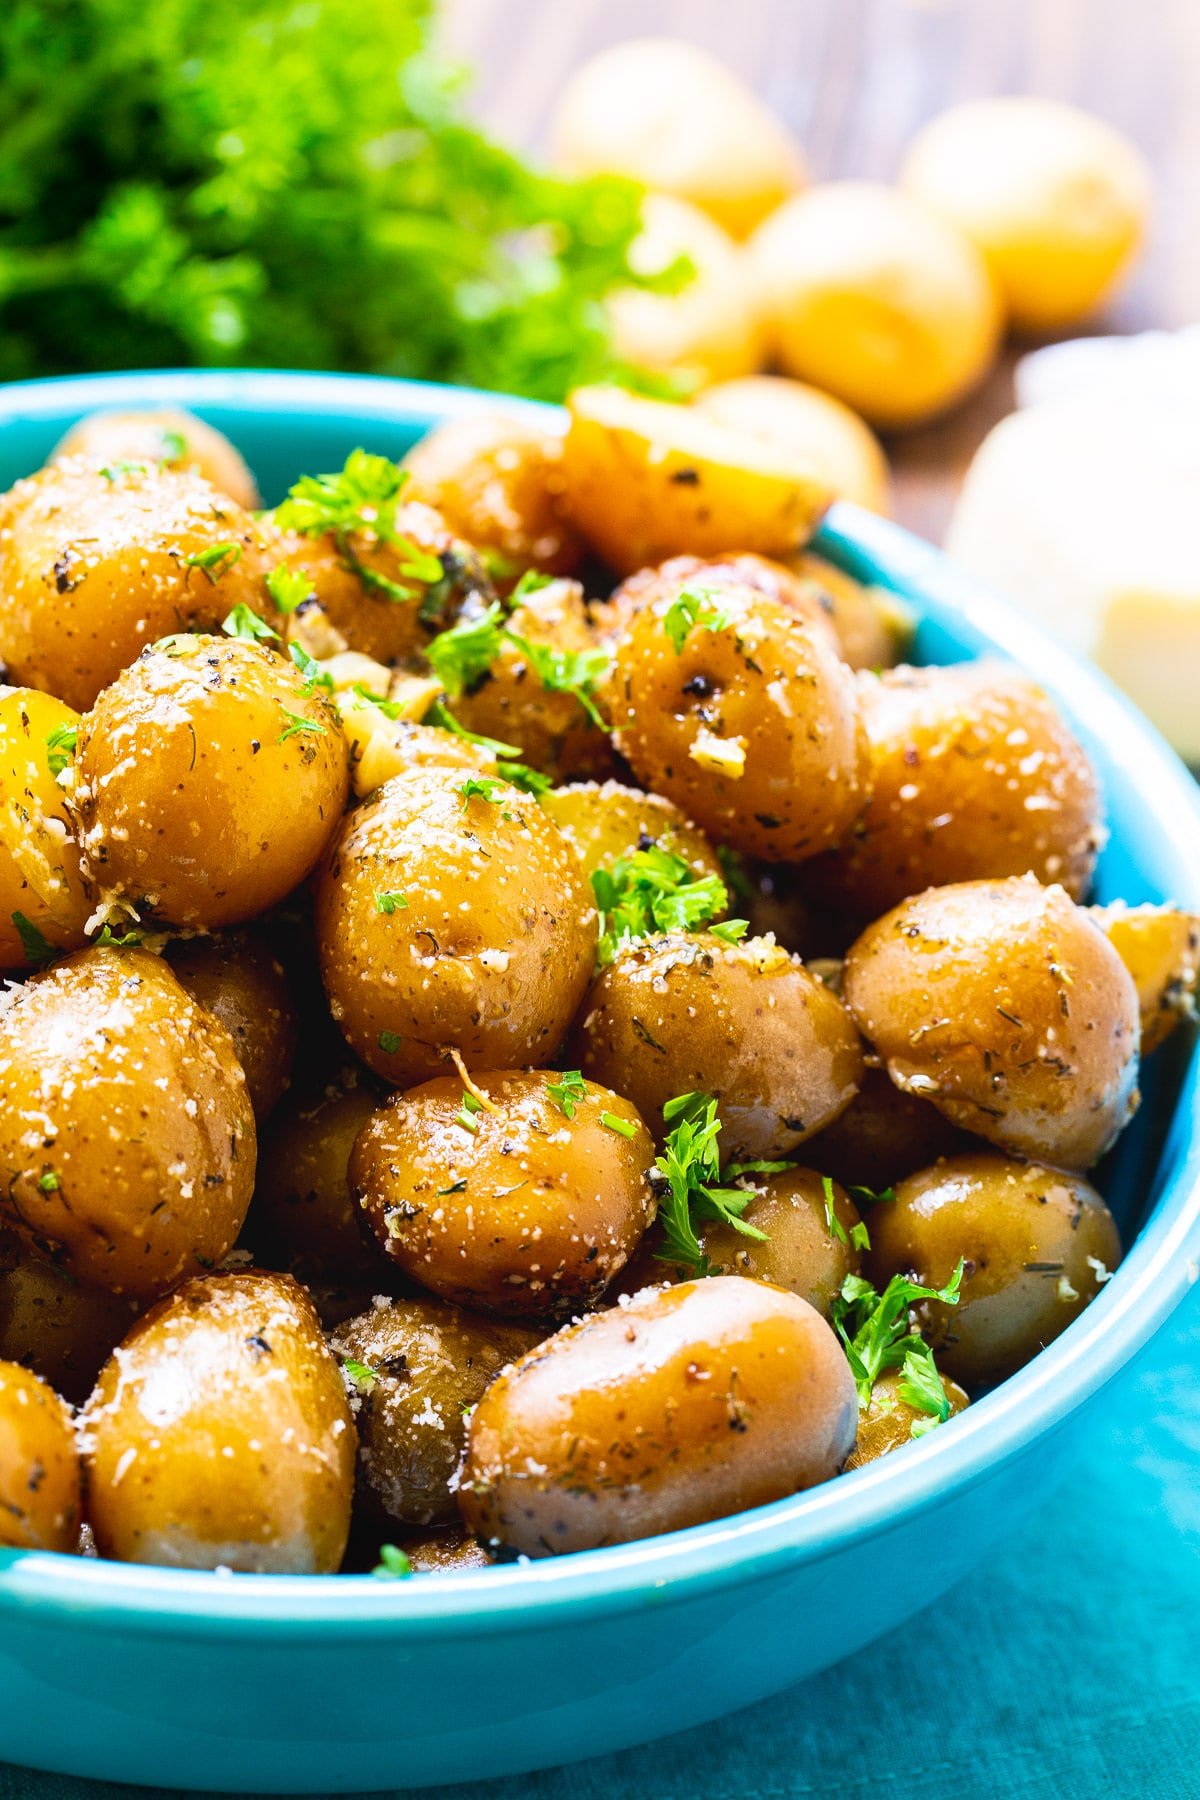 Potatoes in a blue bowl.